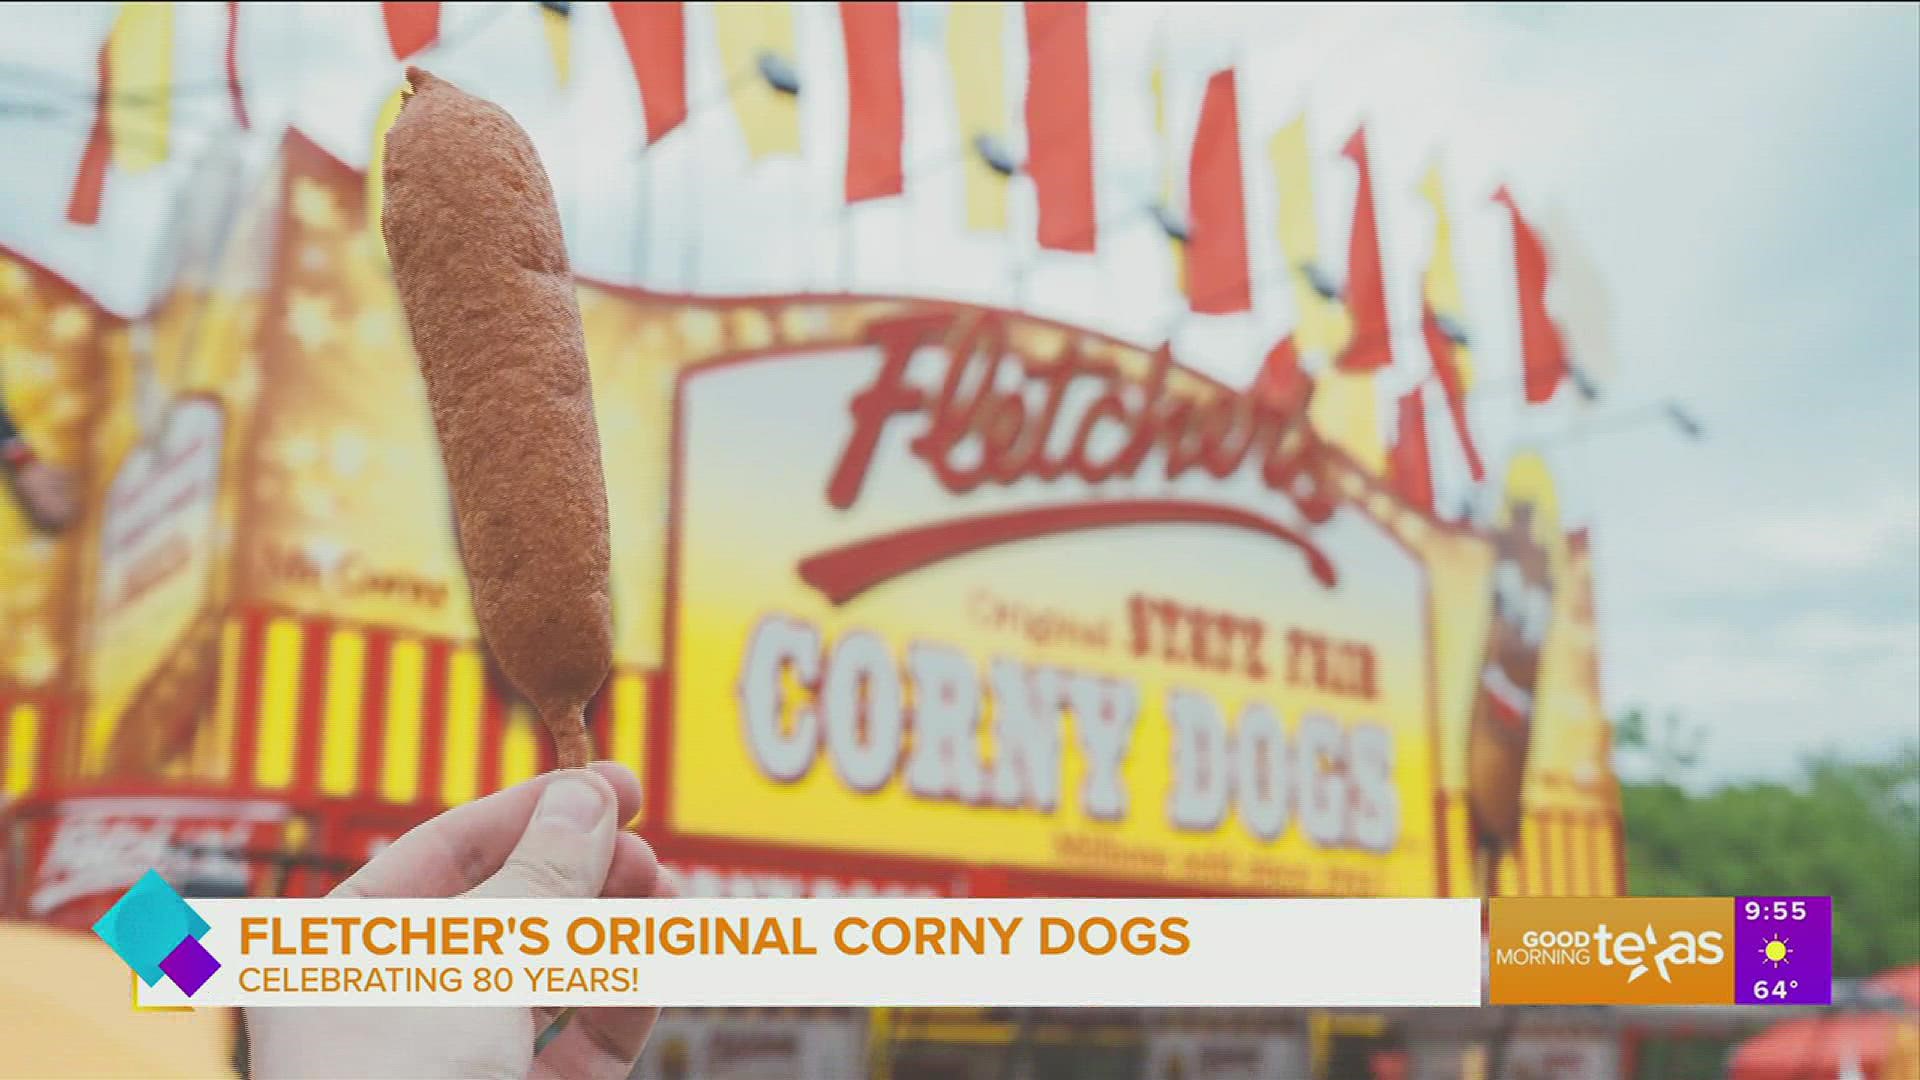 When you think of the State Fair of Texas - what immediately comes to mind? For us, it’s corny dogs! And this year there’s a big reason to celebrate.